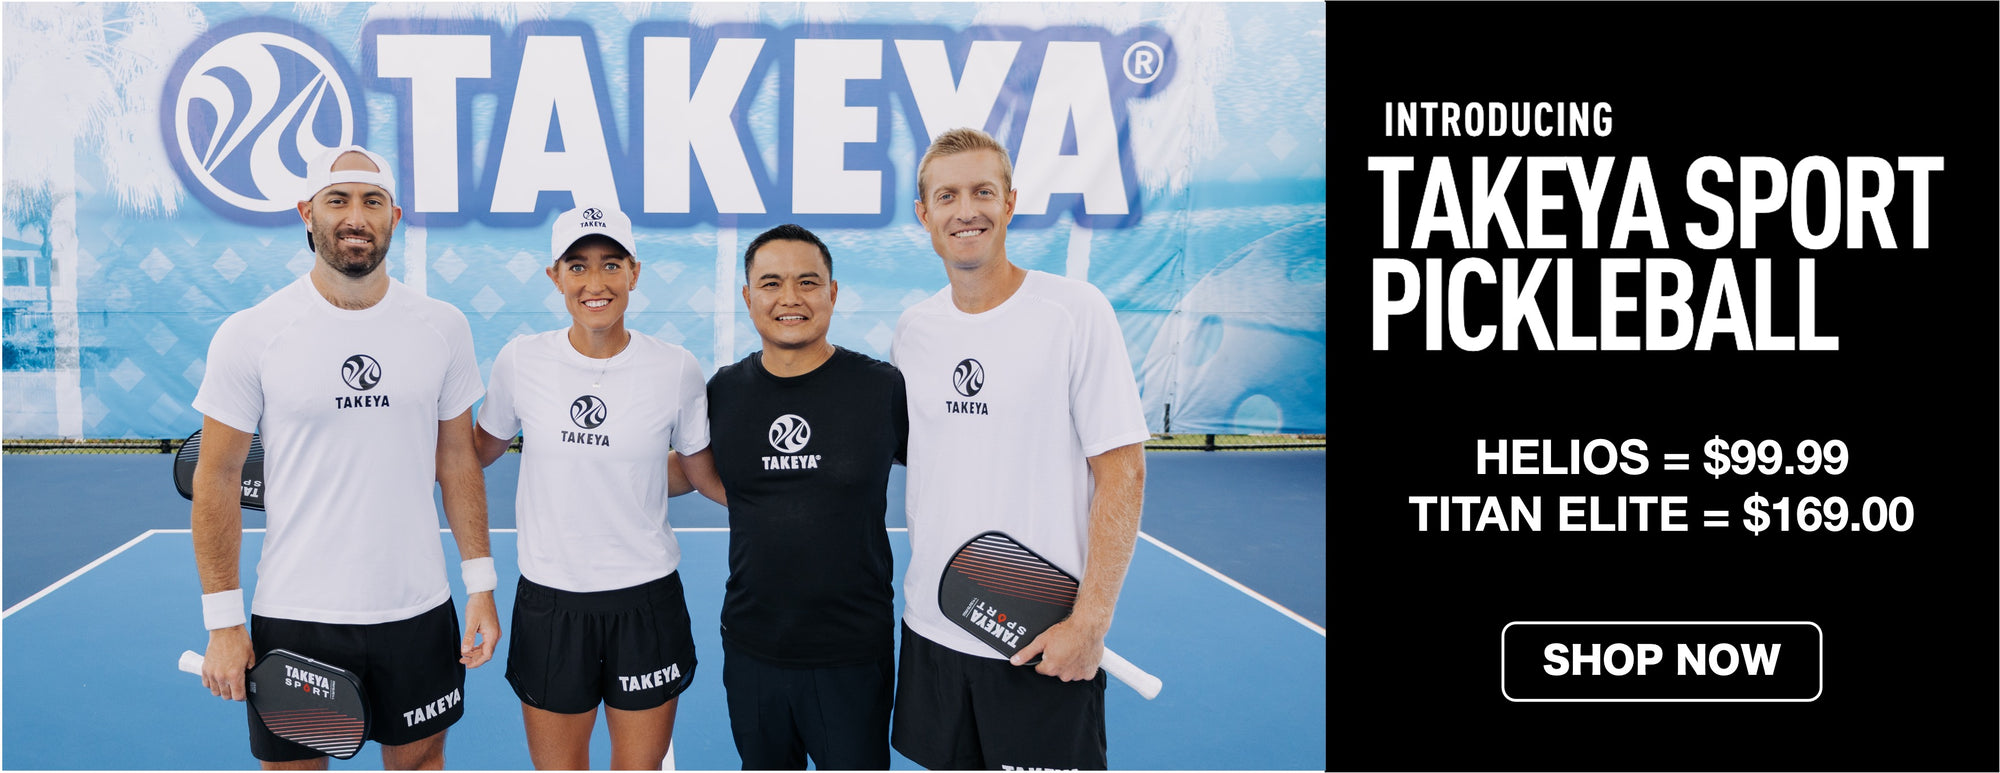 Pickleball Superstore launches TAKEYA Pickleball Paddles - Helios and Titan Elite